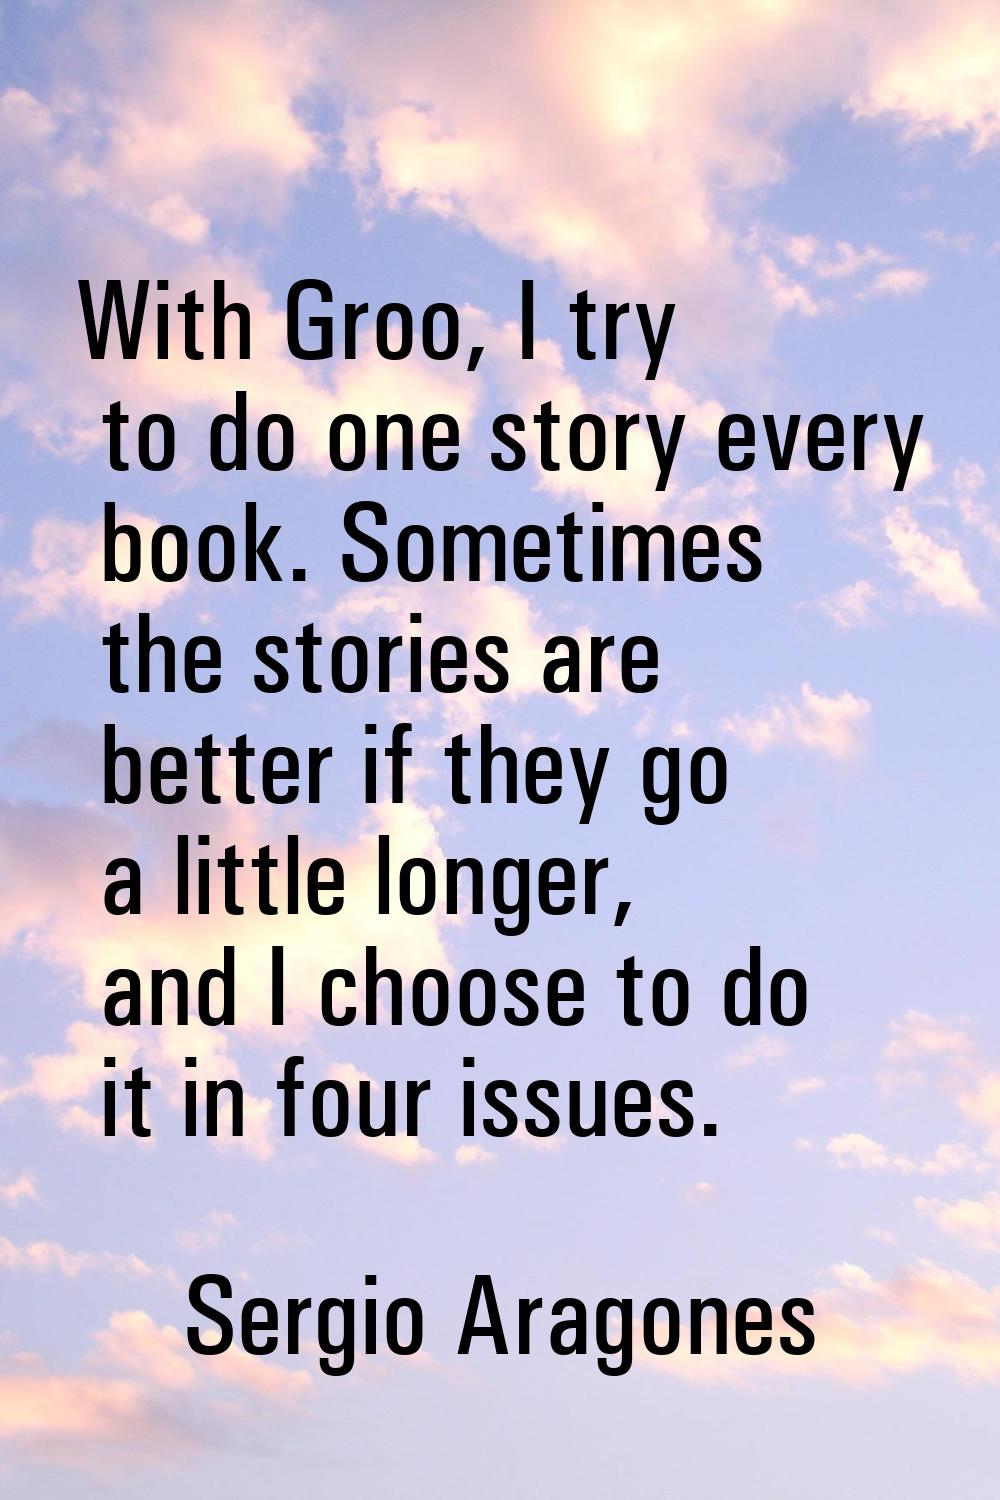 With Groo, I try to do one story every book. Sometimes the stories are better if they go a little l